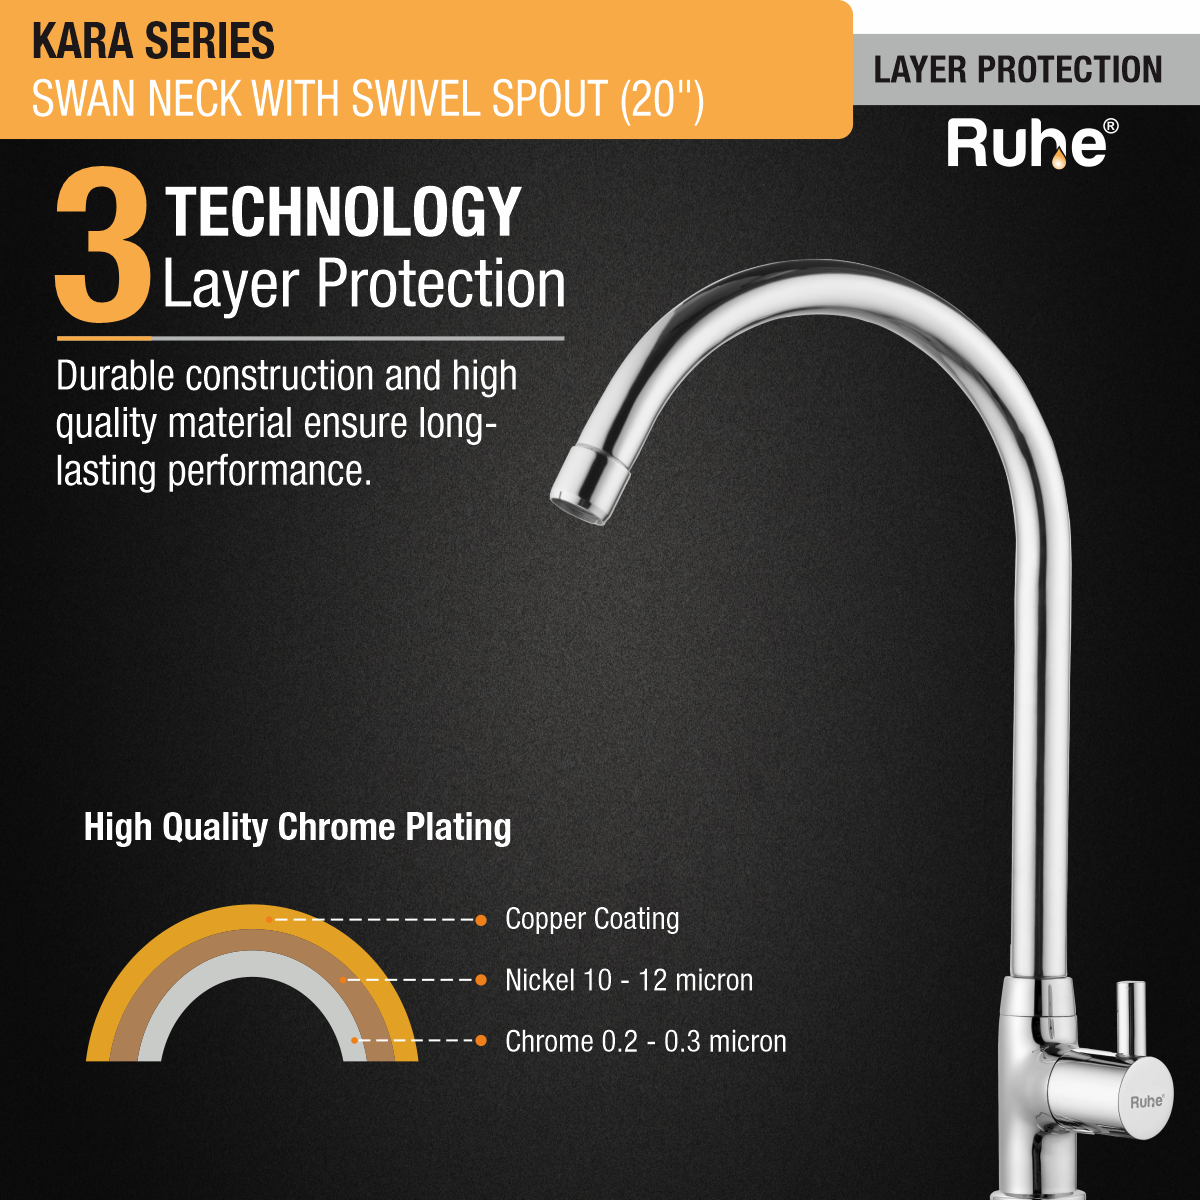 Kara Swan Neck with Large (20 inches) Round Swivel Spout Faucet 3 layer protection